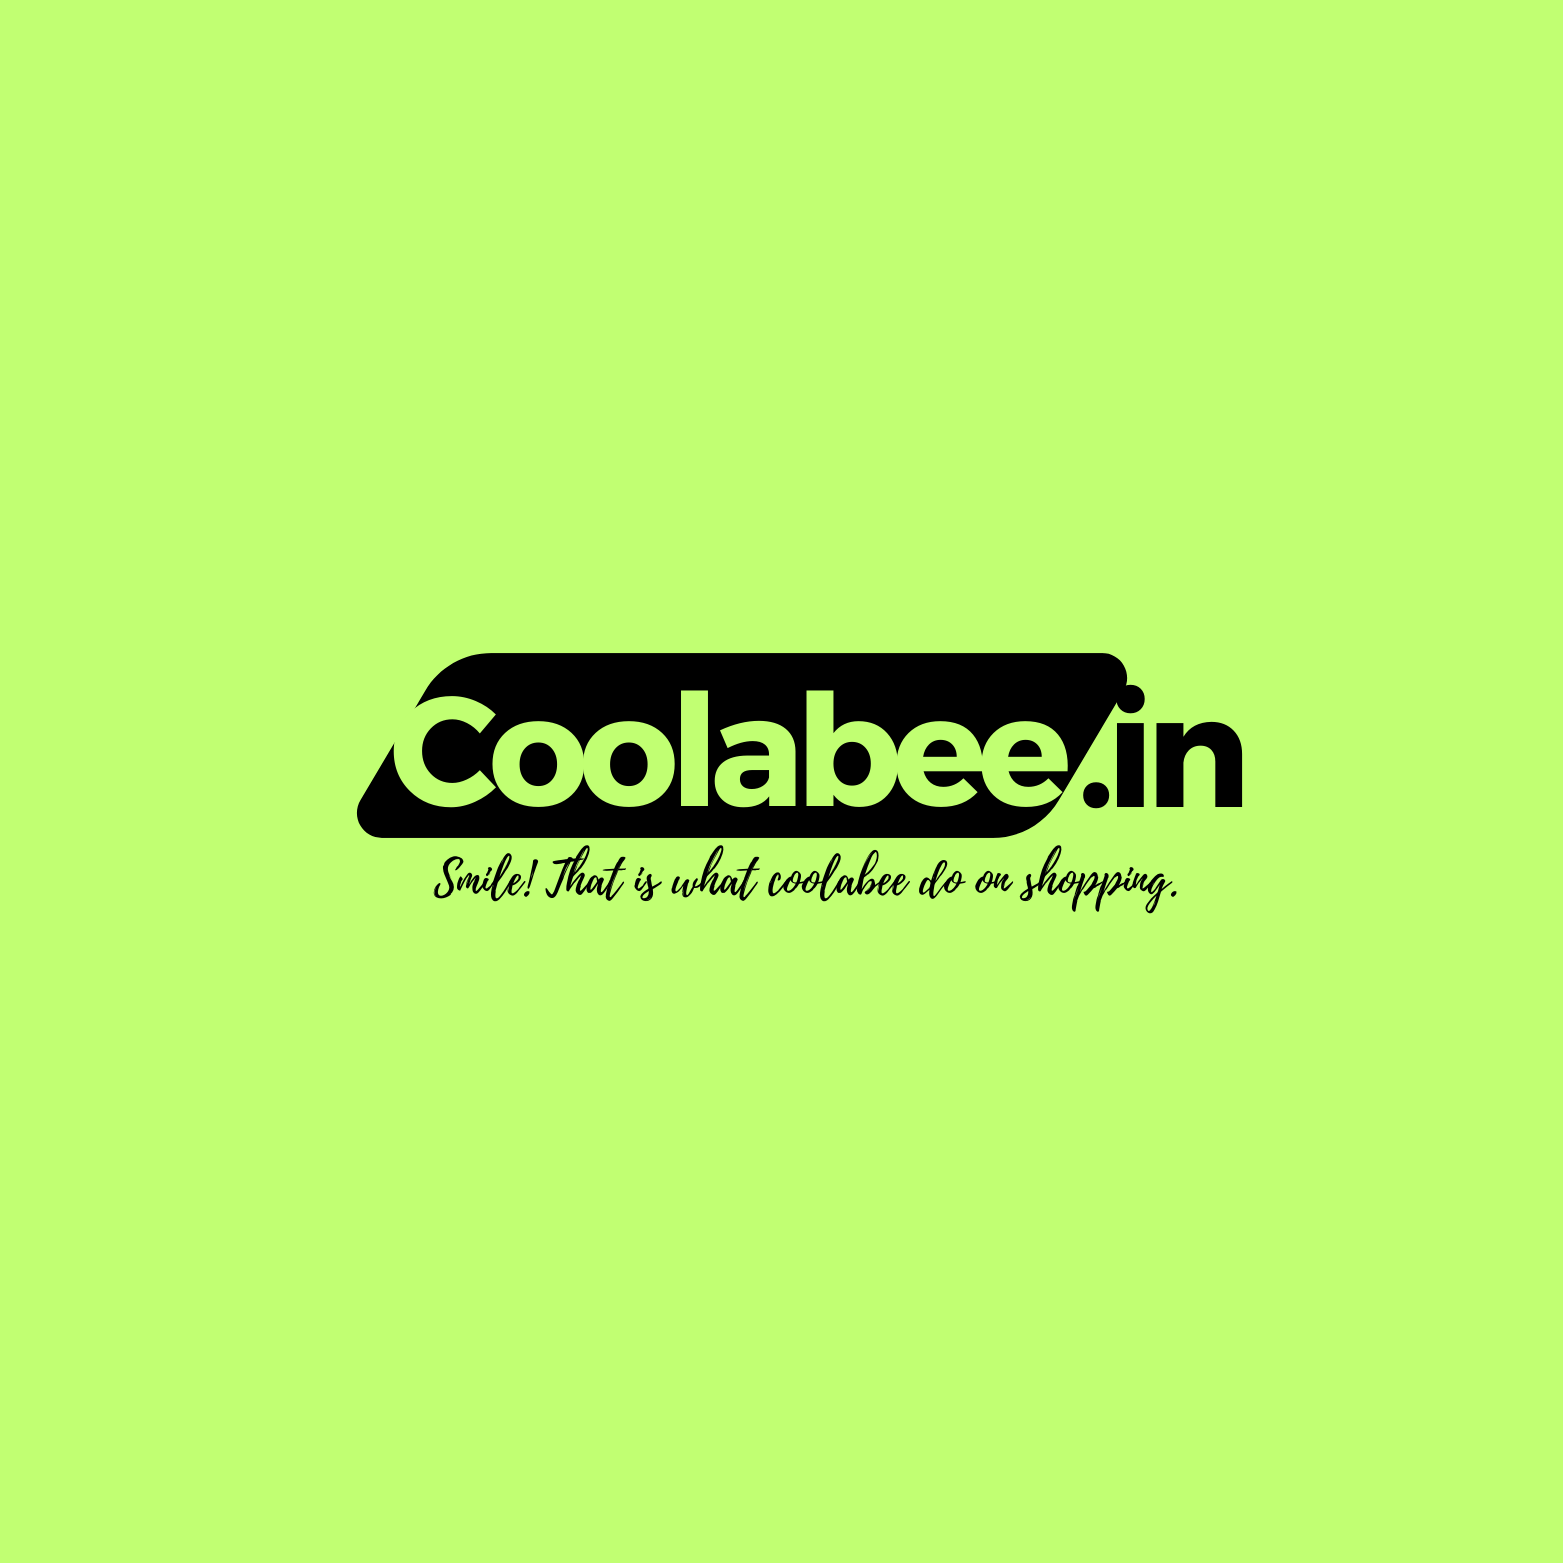 Coolabee, led by Suhail Shaji, is revolutionizing the landscape of e-commerce by prioritizing quality products and delivering exceptional customer service.